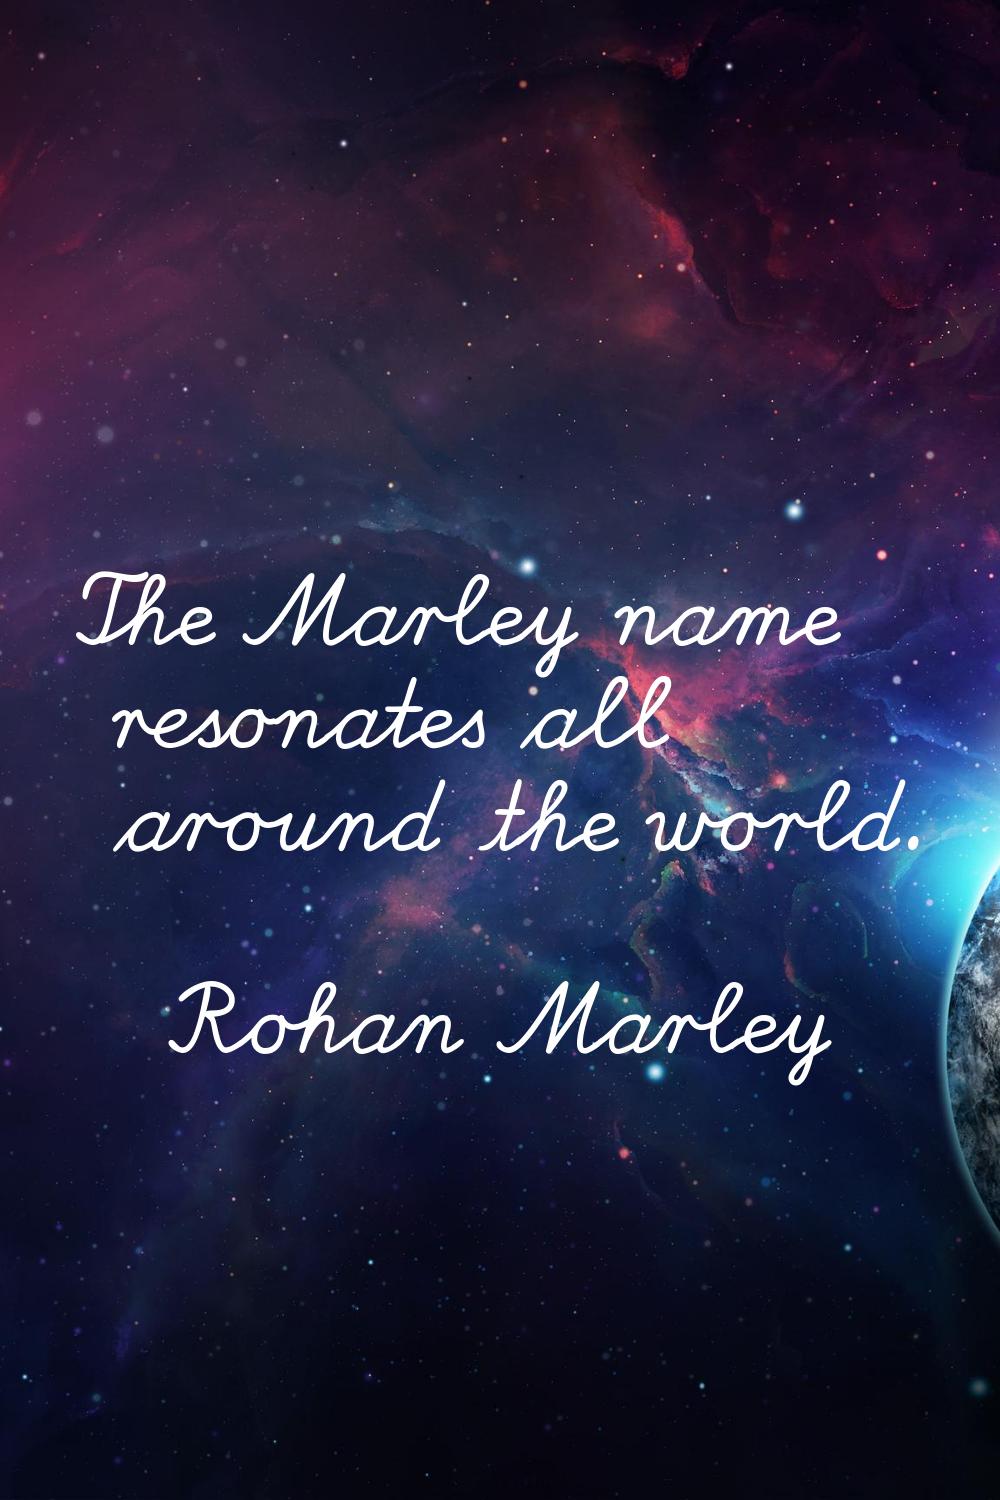 The Marley name resonates all around the world.